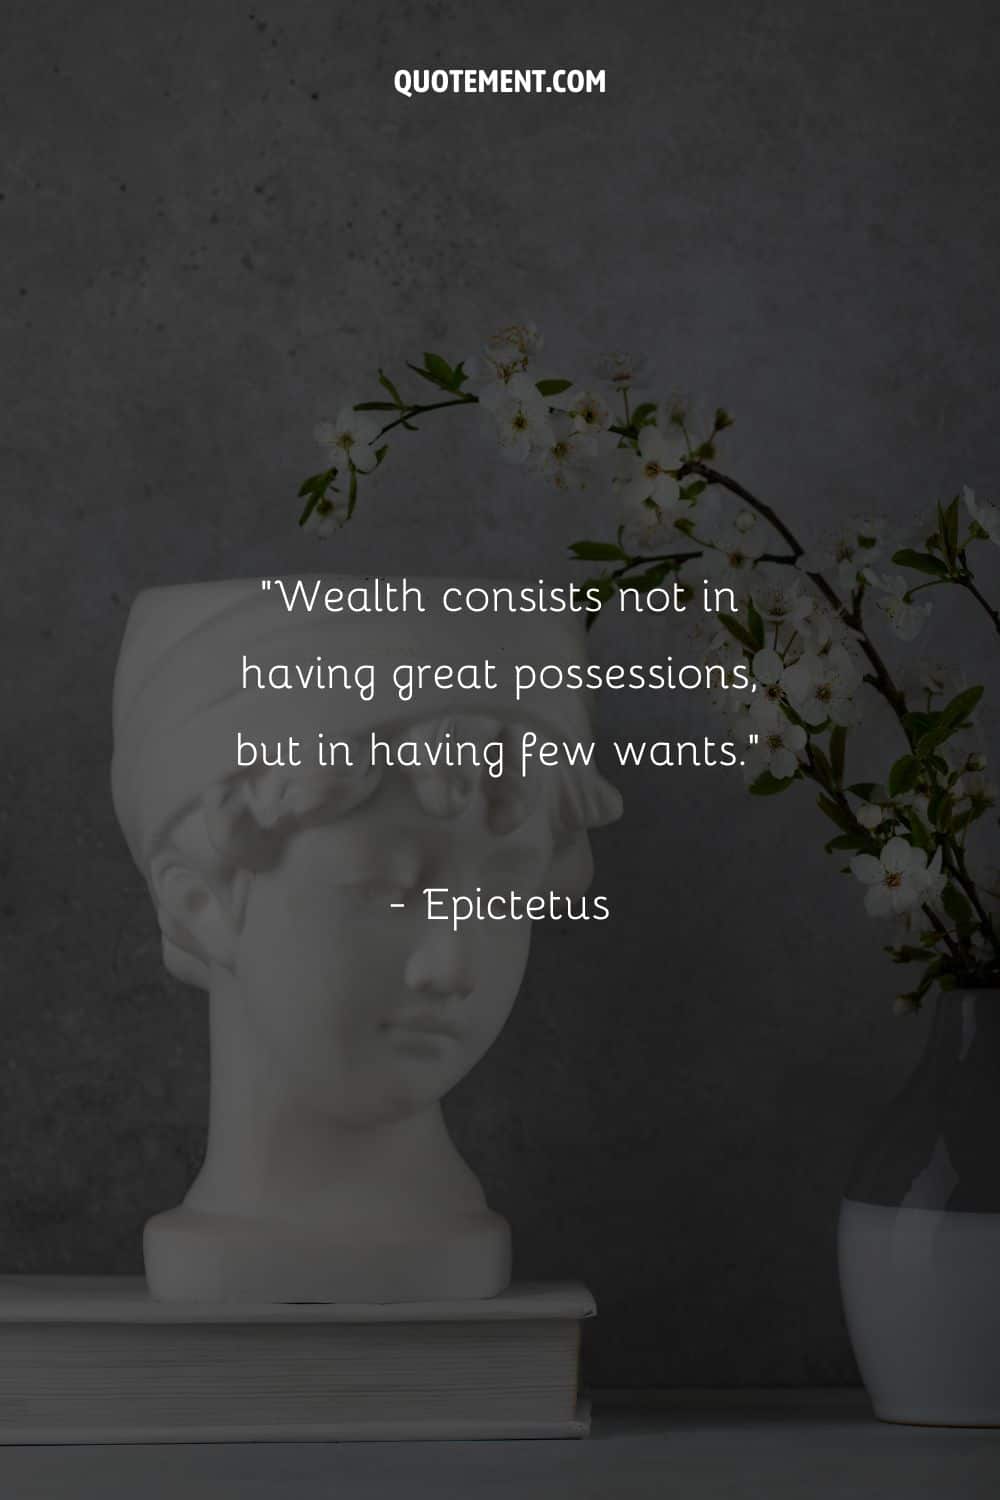 Wealth consists not in having great possessions, but in having few wants